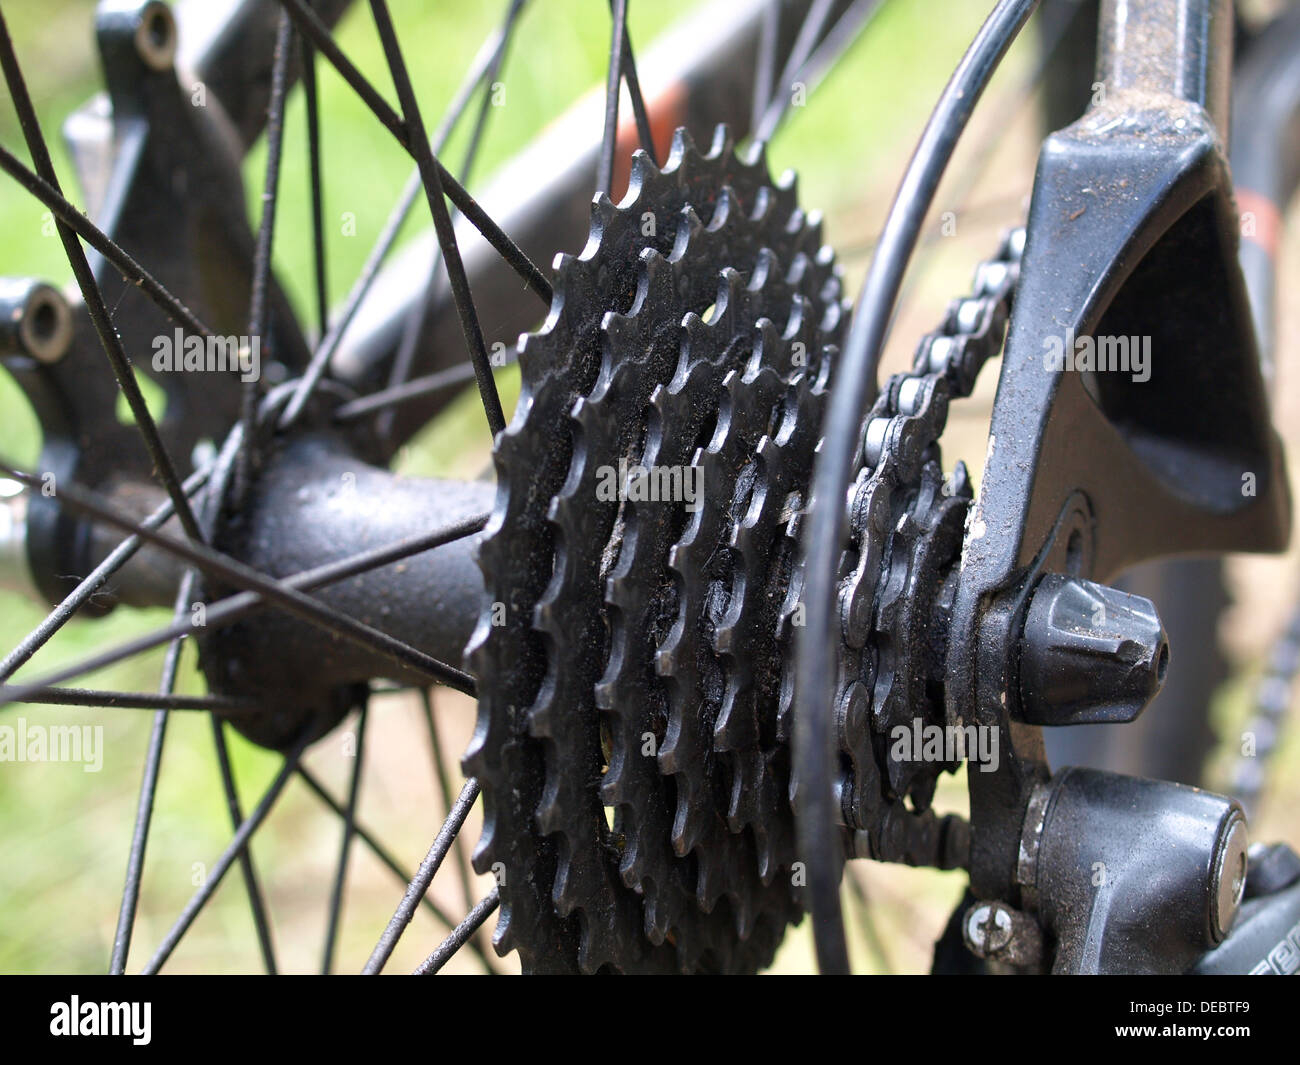 gear and images - Alamy Hub hi-res photography stock